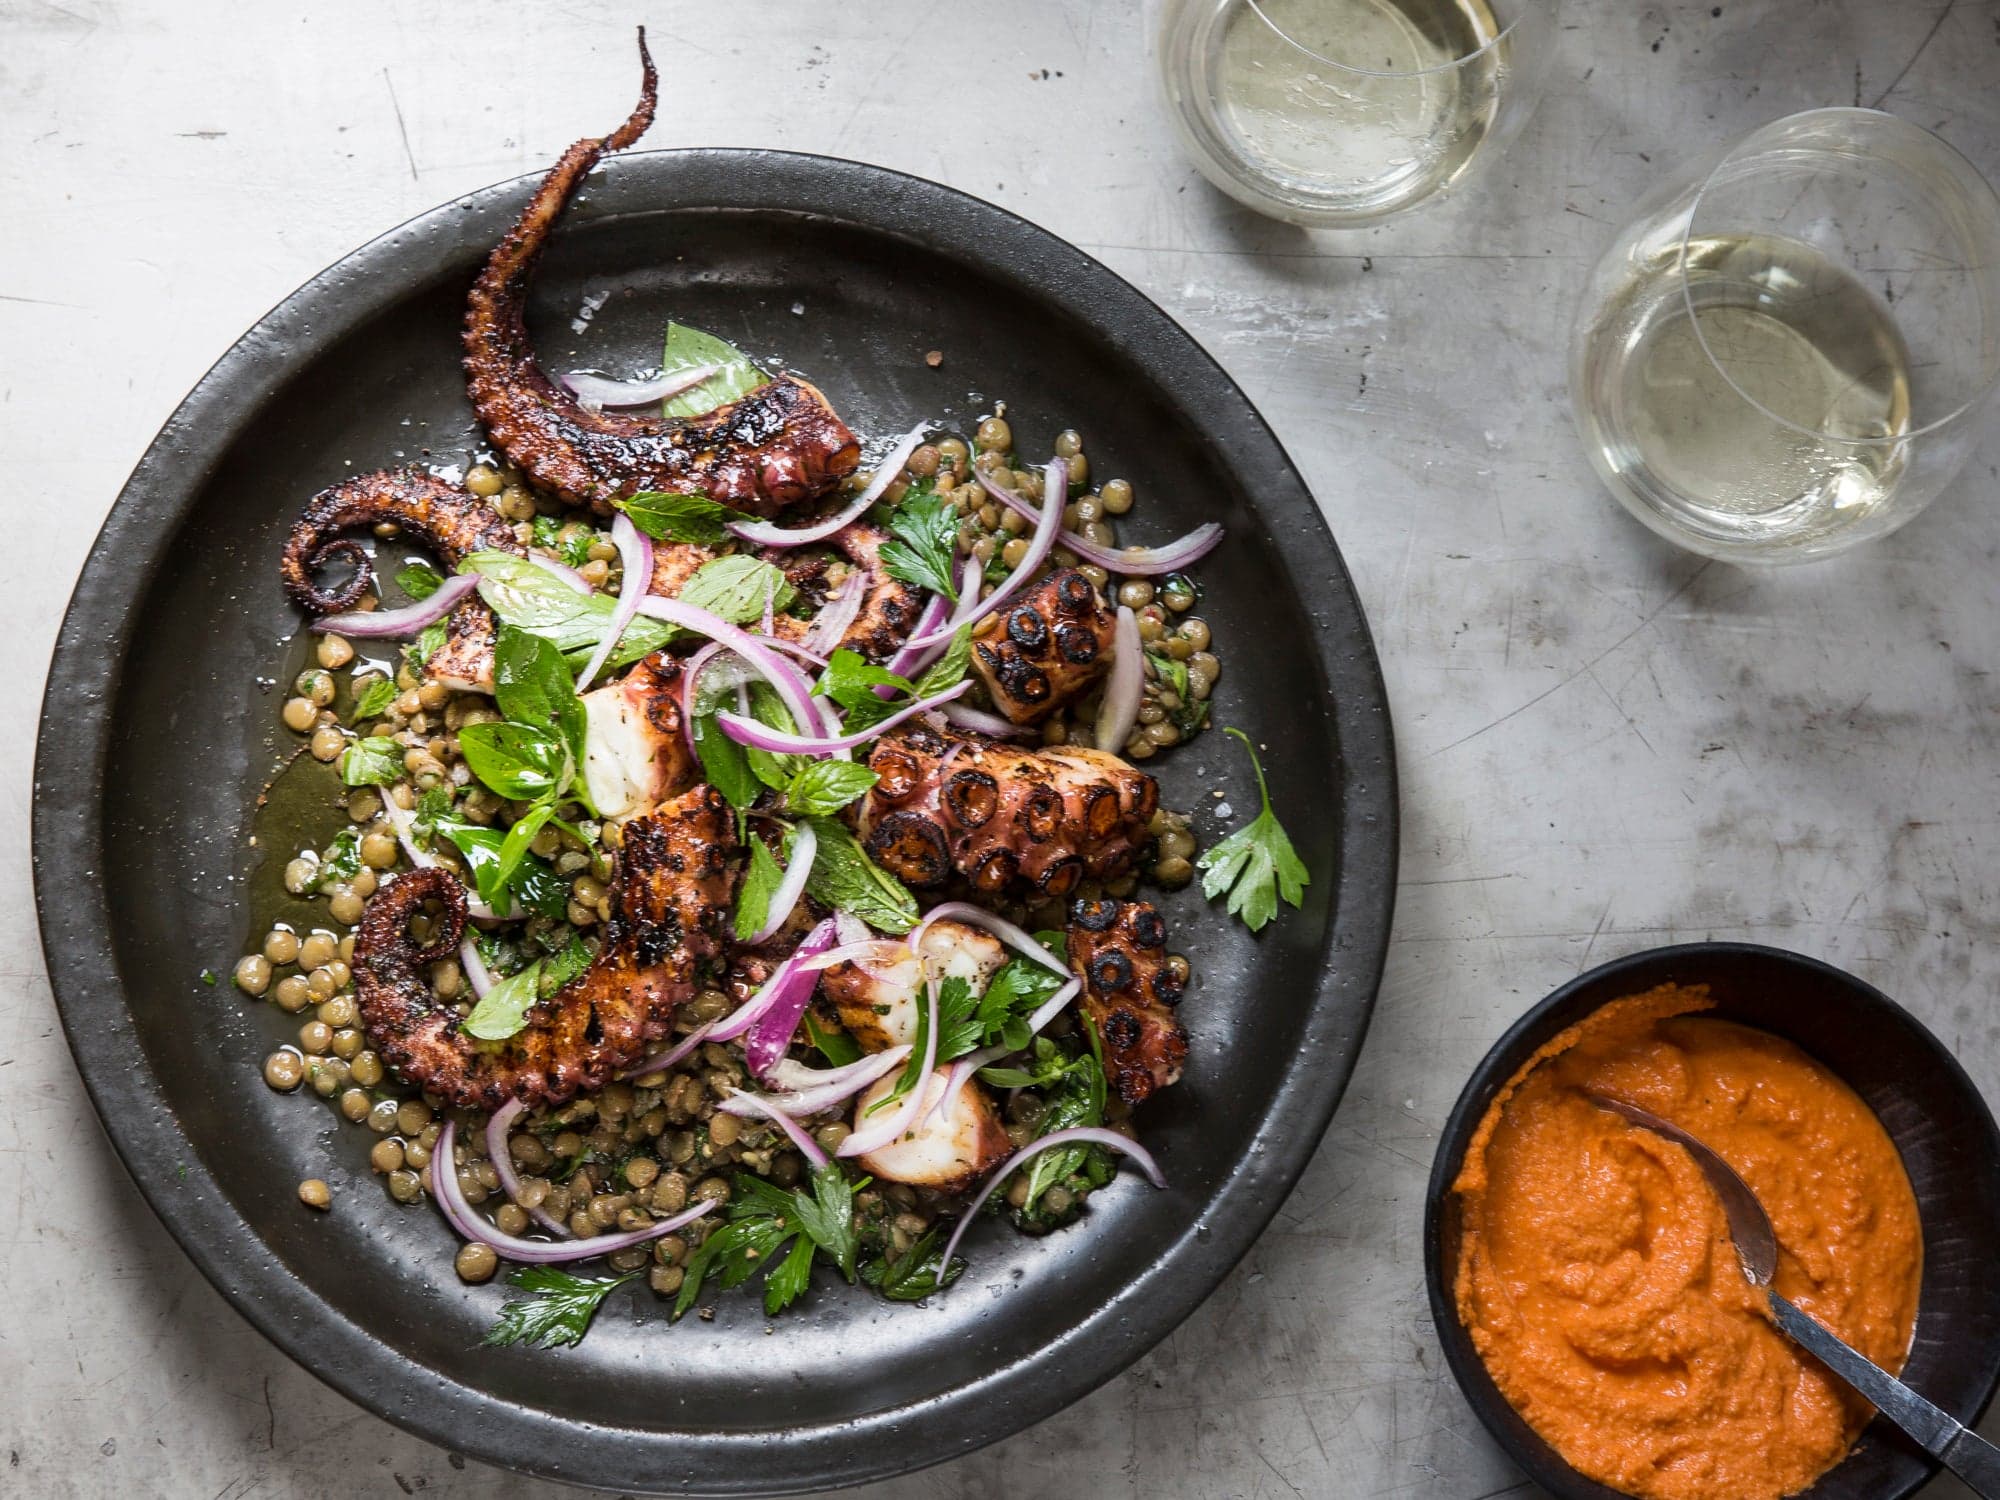 Grilled Octopus with Green Lentils and Romesco